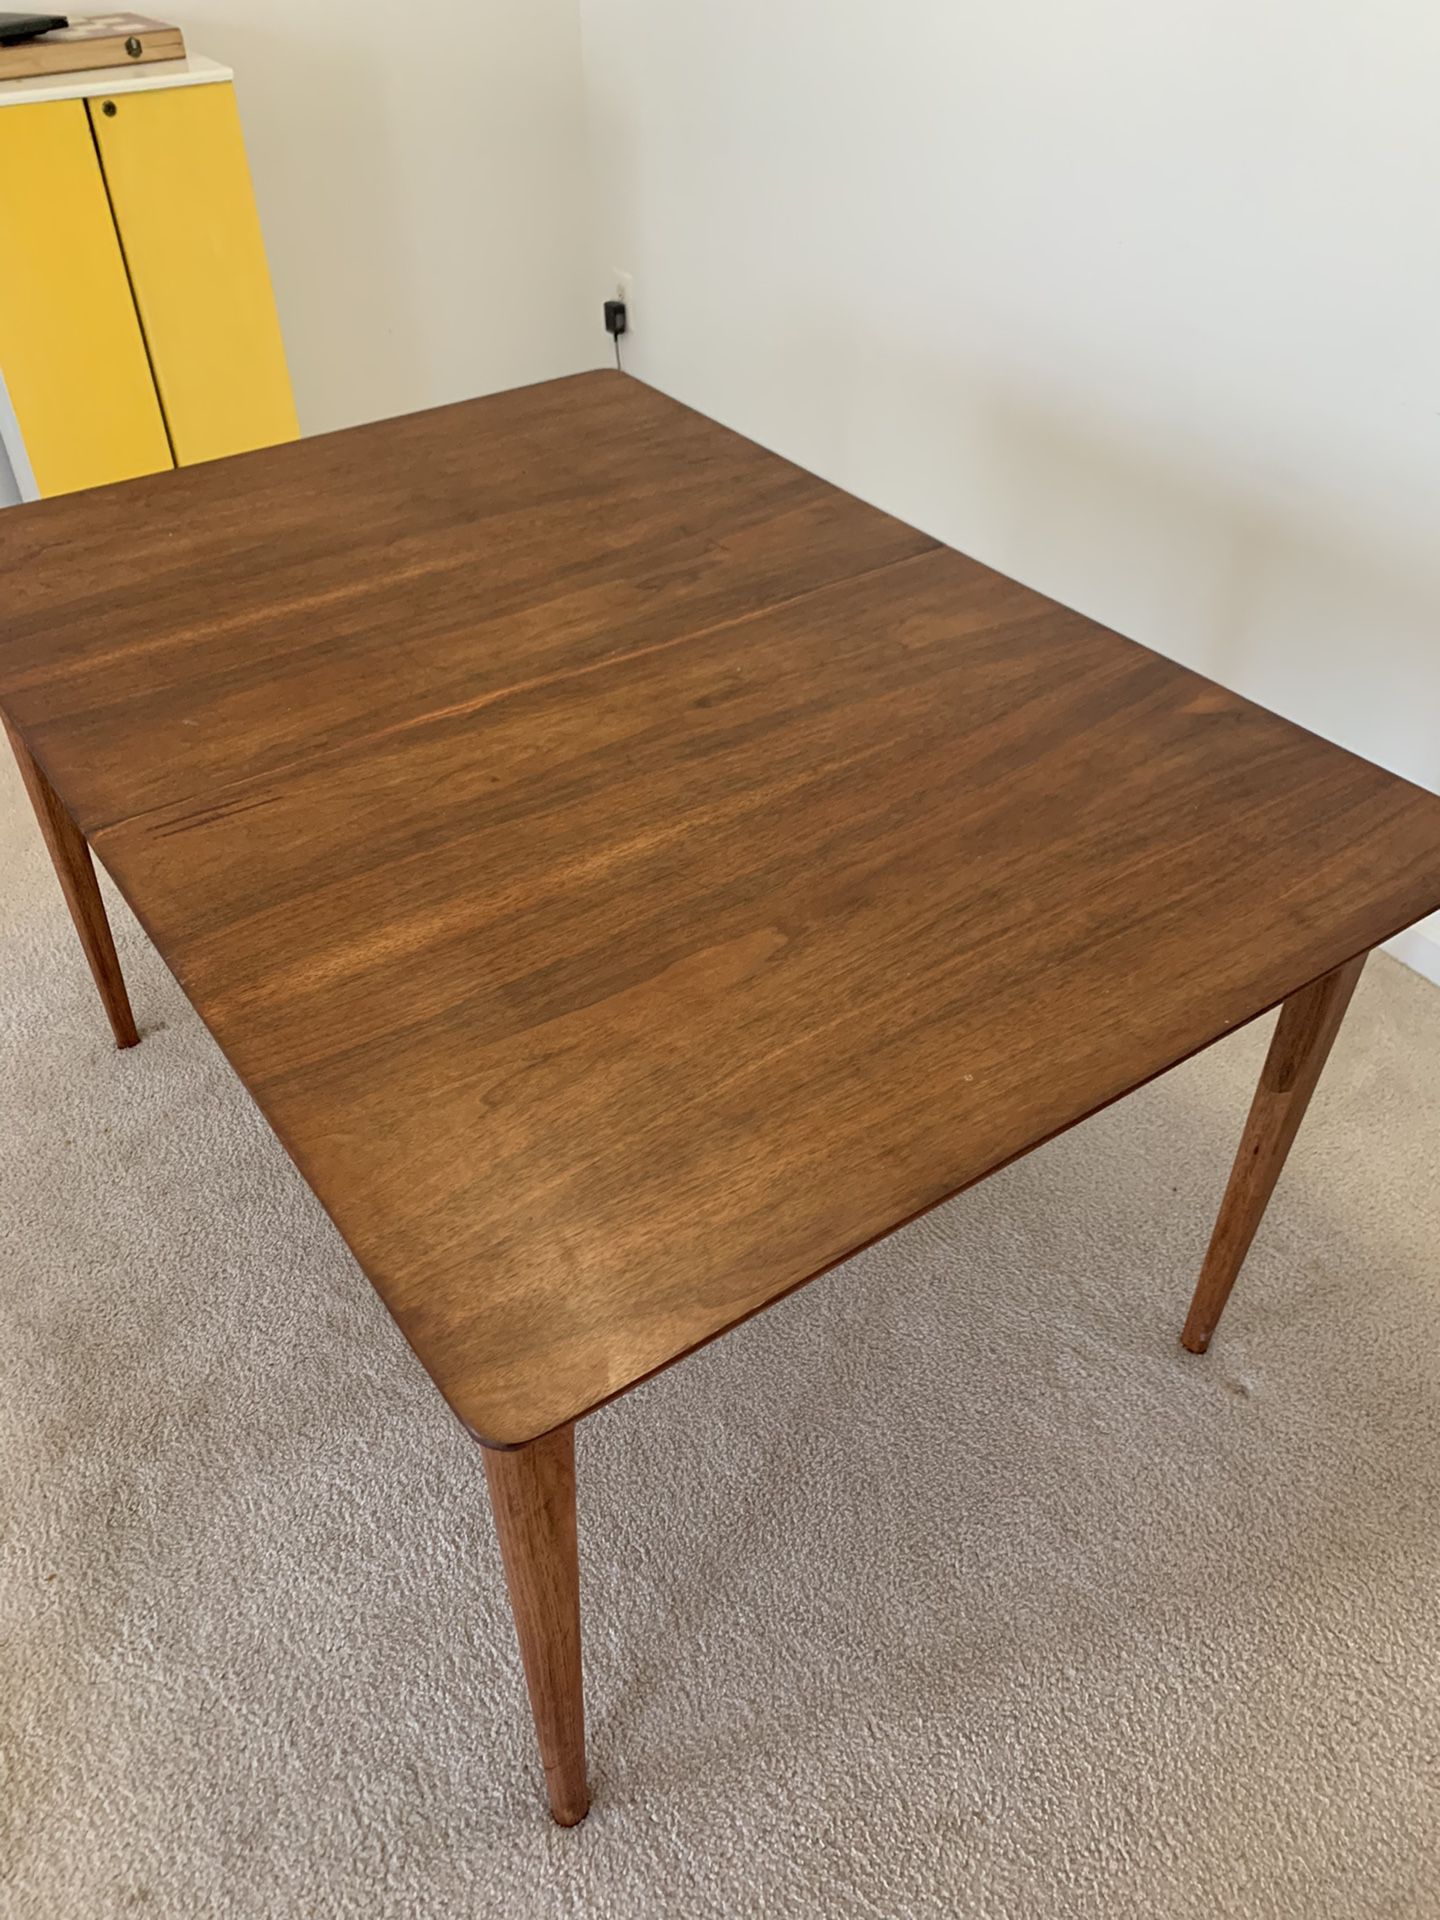 FREE!!! Large dining table